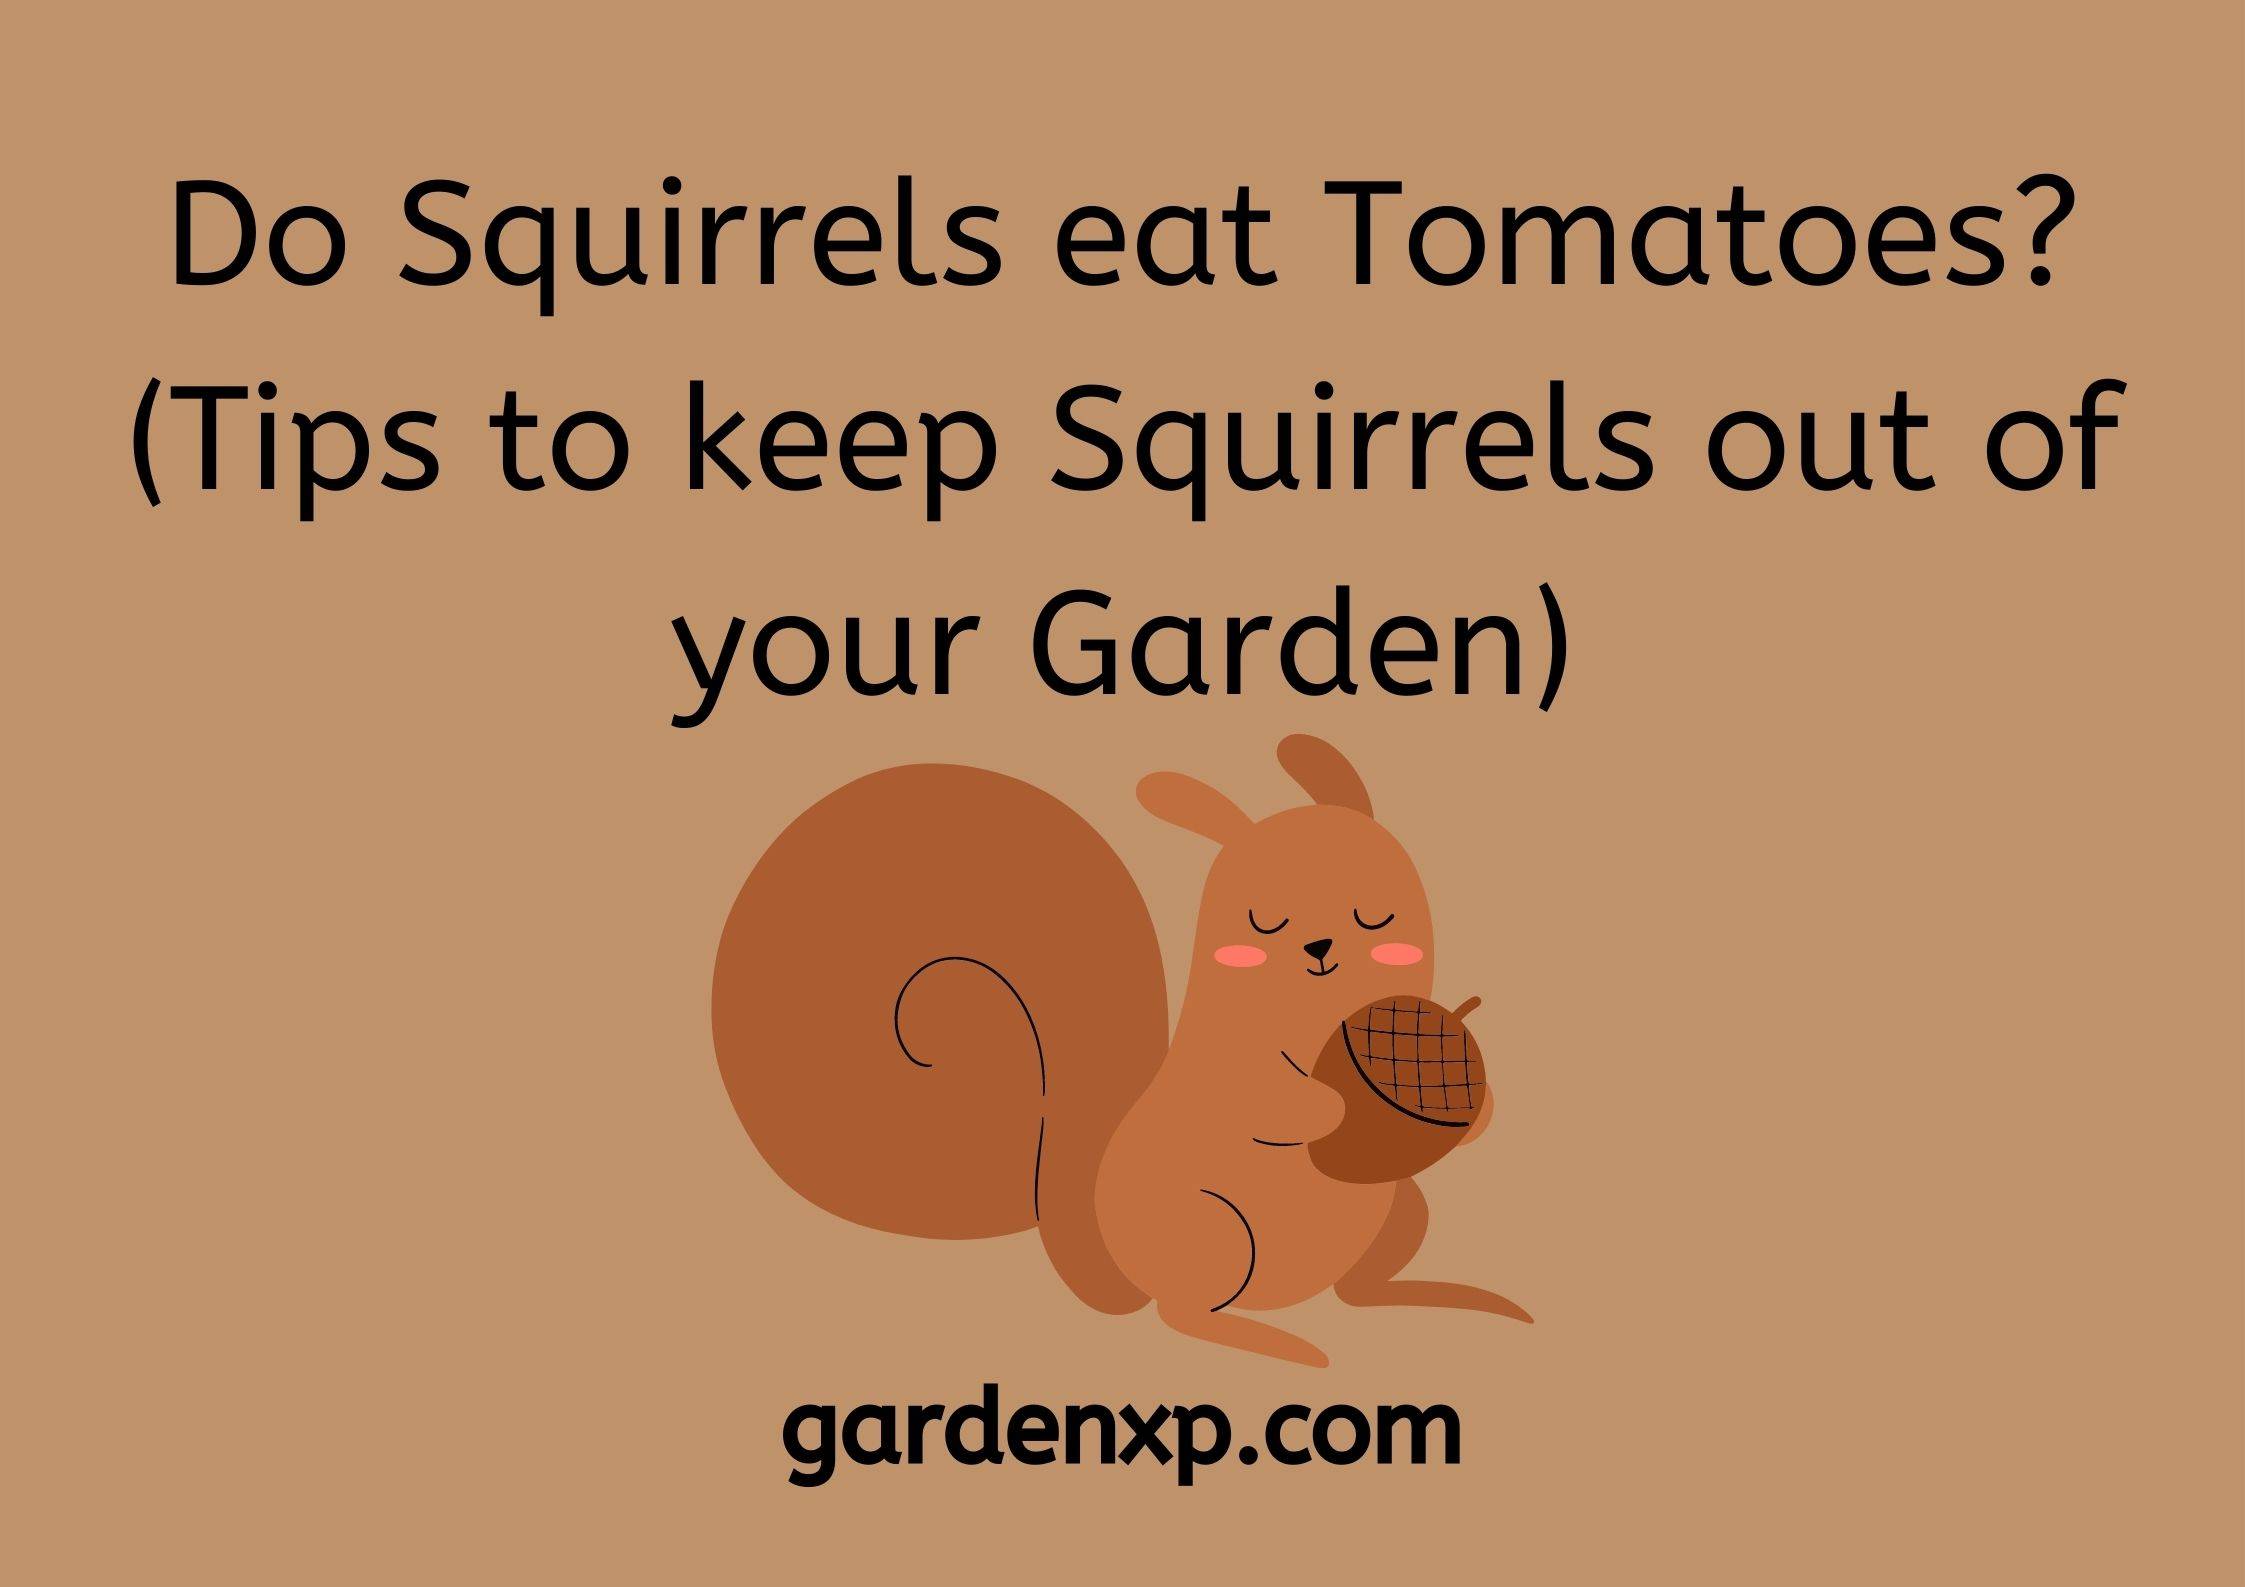 Do Squirrels eat Tomatoes (Tips to keep Squirrels out of your Garden)